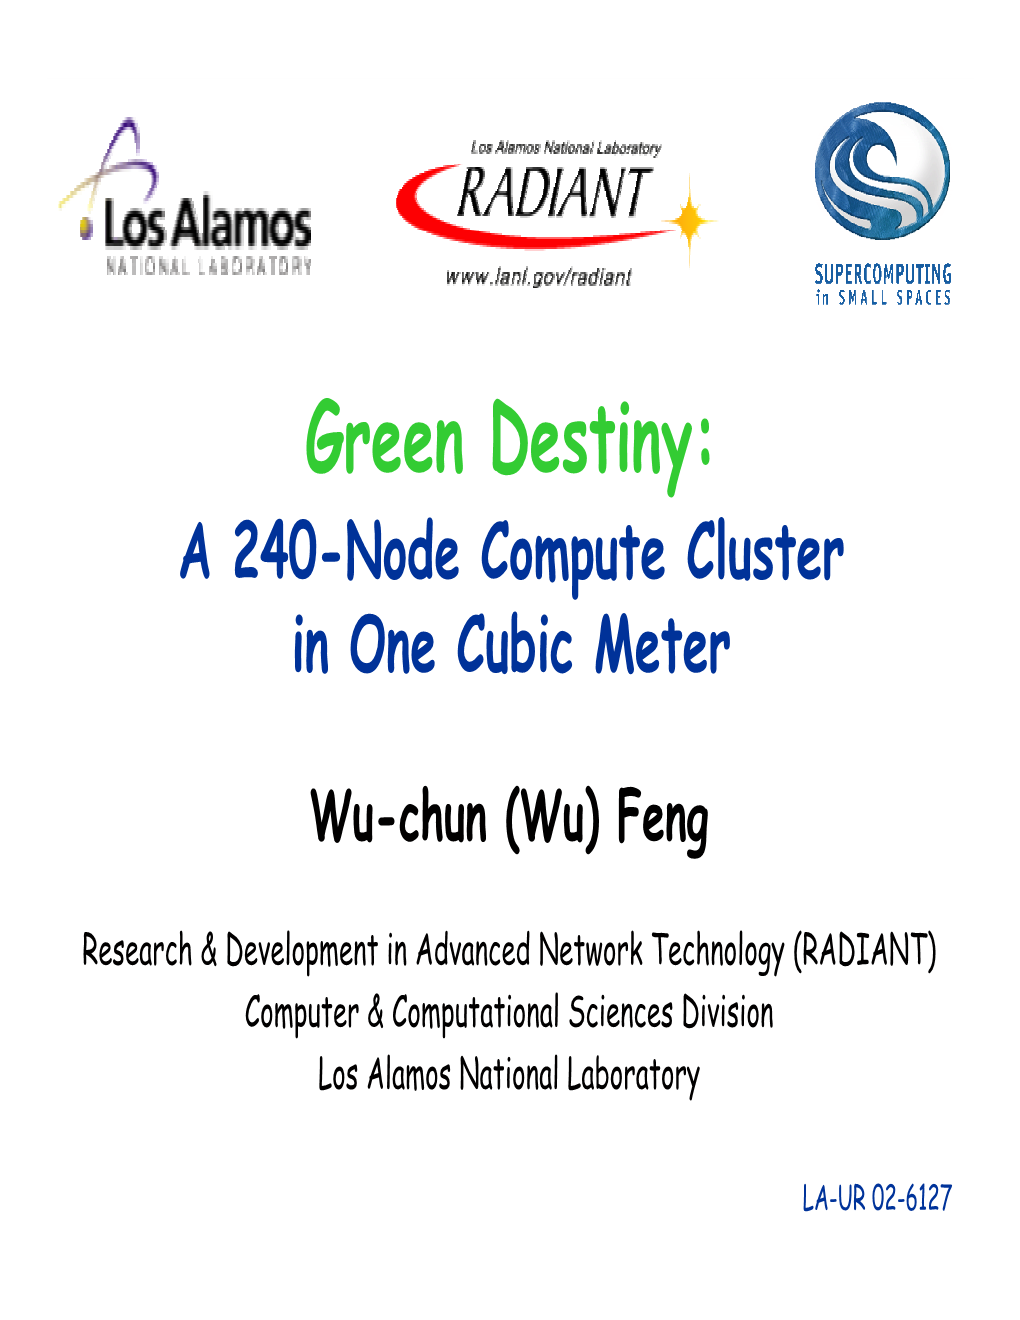 Green Destiny: a 240-Node Compute Cluster in One Cubic Meter